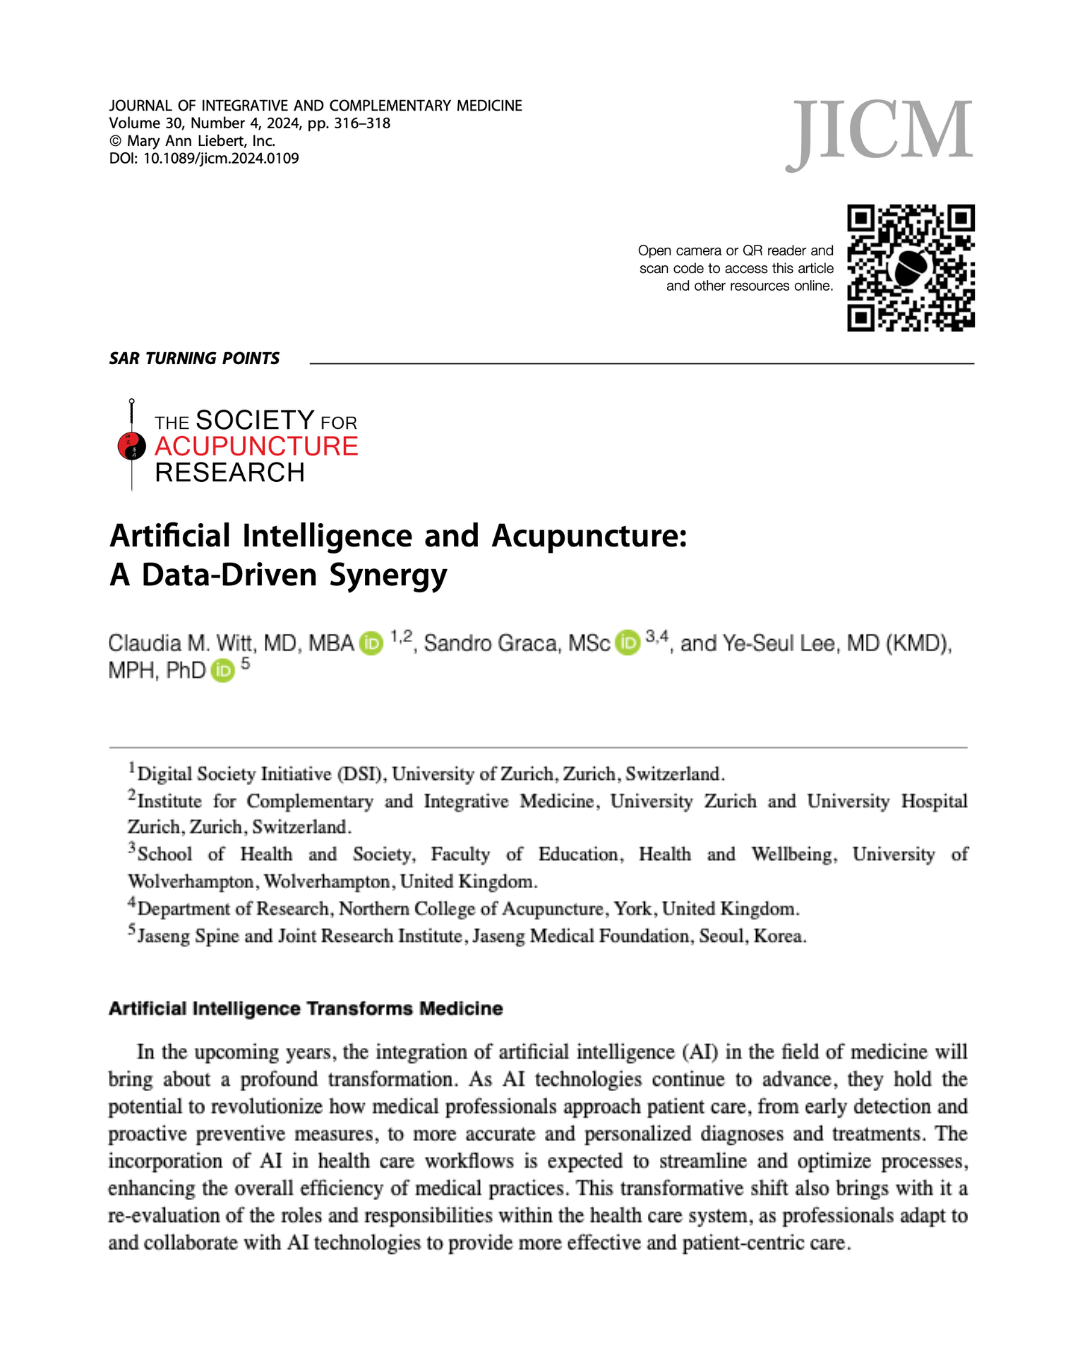 Artificial Intelligence and Acupuncture: A Data-Driven Synergy